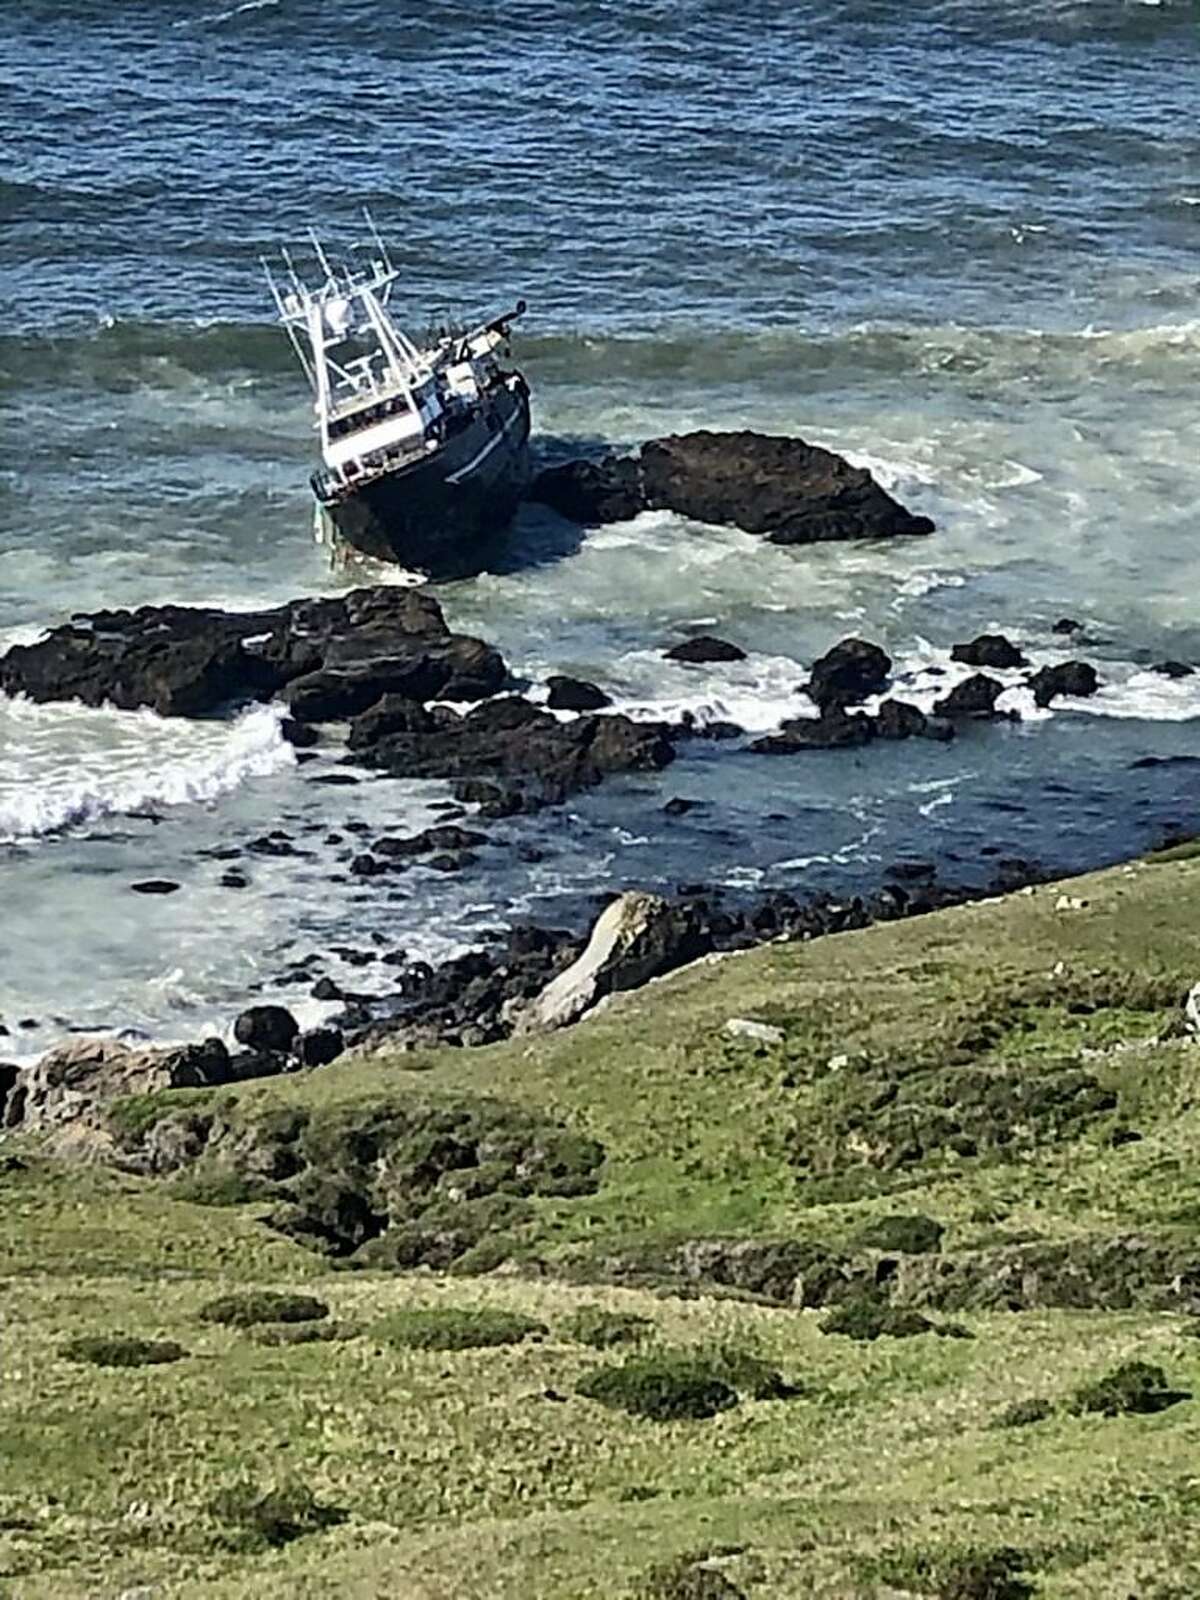 The Coast Guard was investigating a possible fuel spill off the coast of West Marin Sunday after a boat ran aground earlier in the weekend.